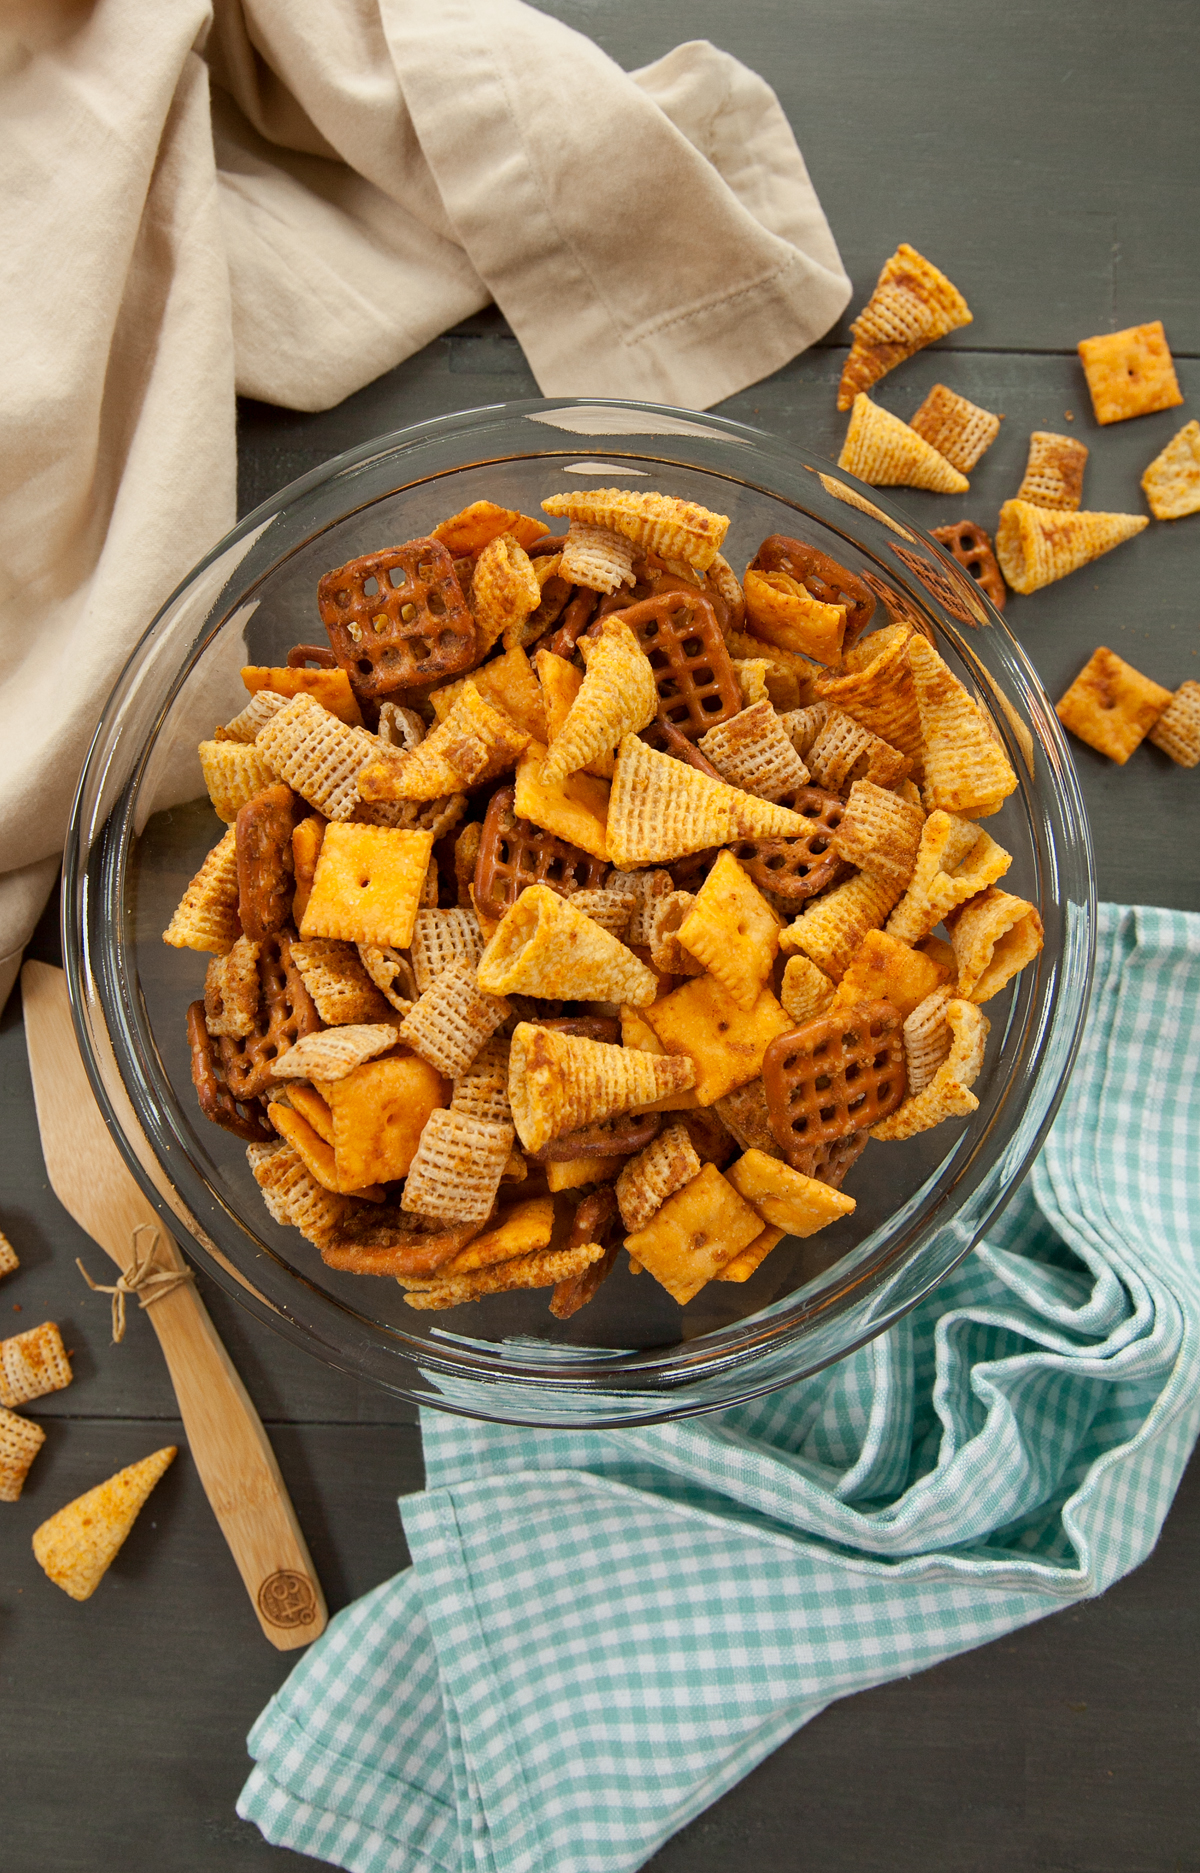 Overhead view of a glass bowl of cheese chex mix with a few pieces scattered on the table.